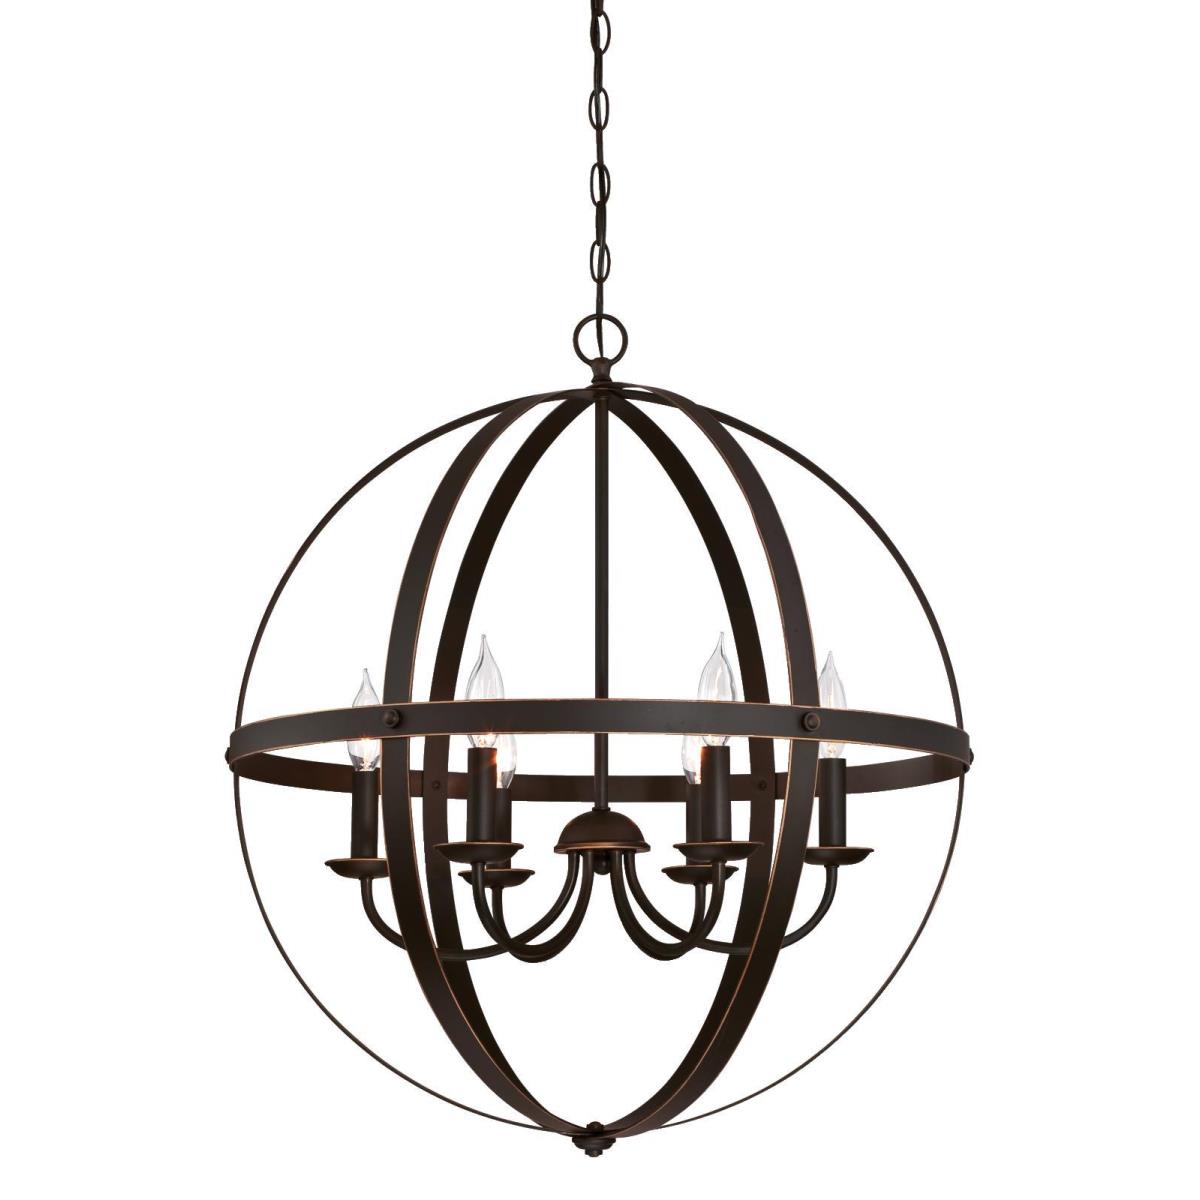 6 Light Chandelier Oil Rubbed Bronze Finish with Highlights